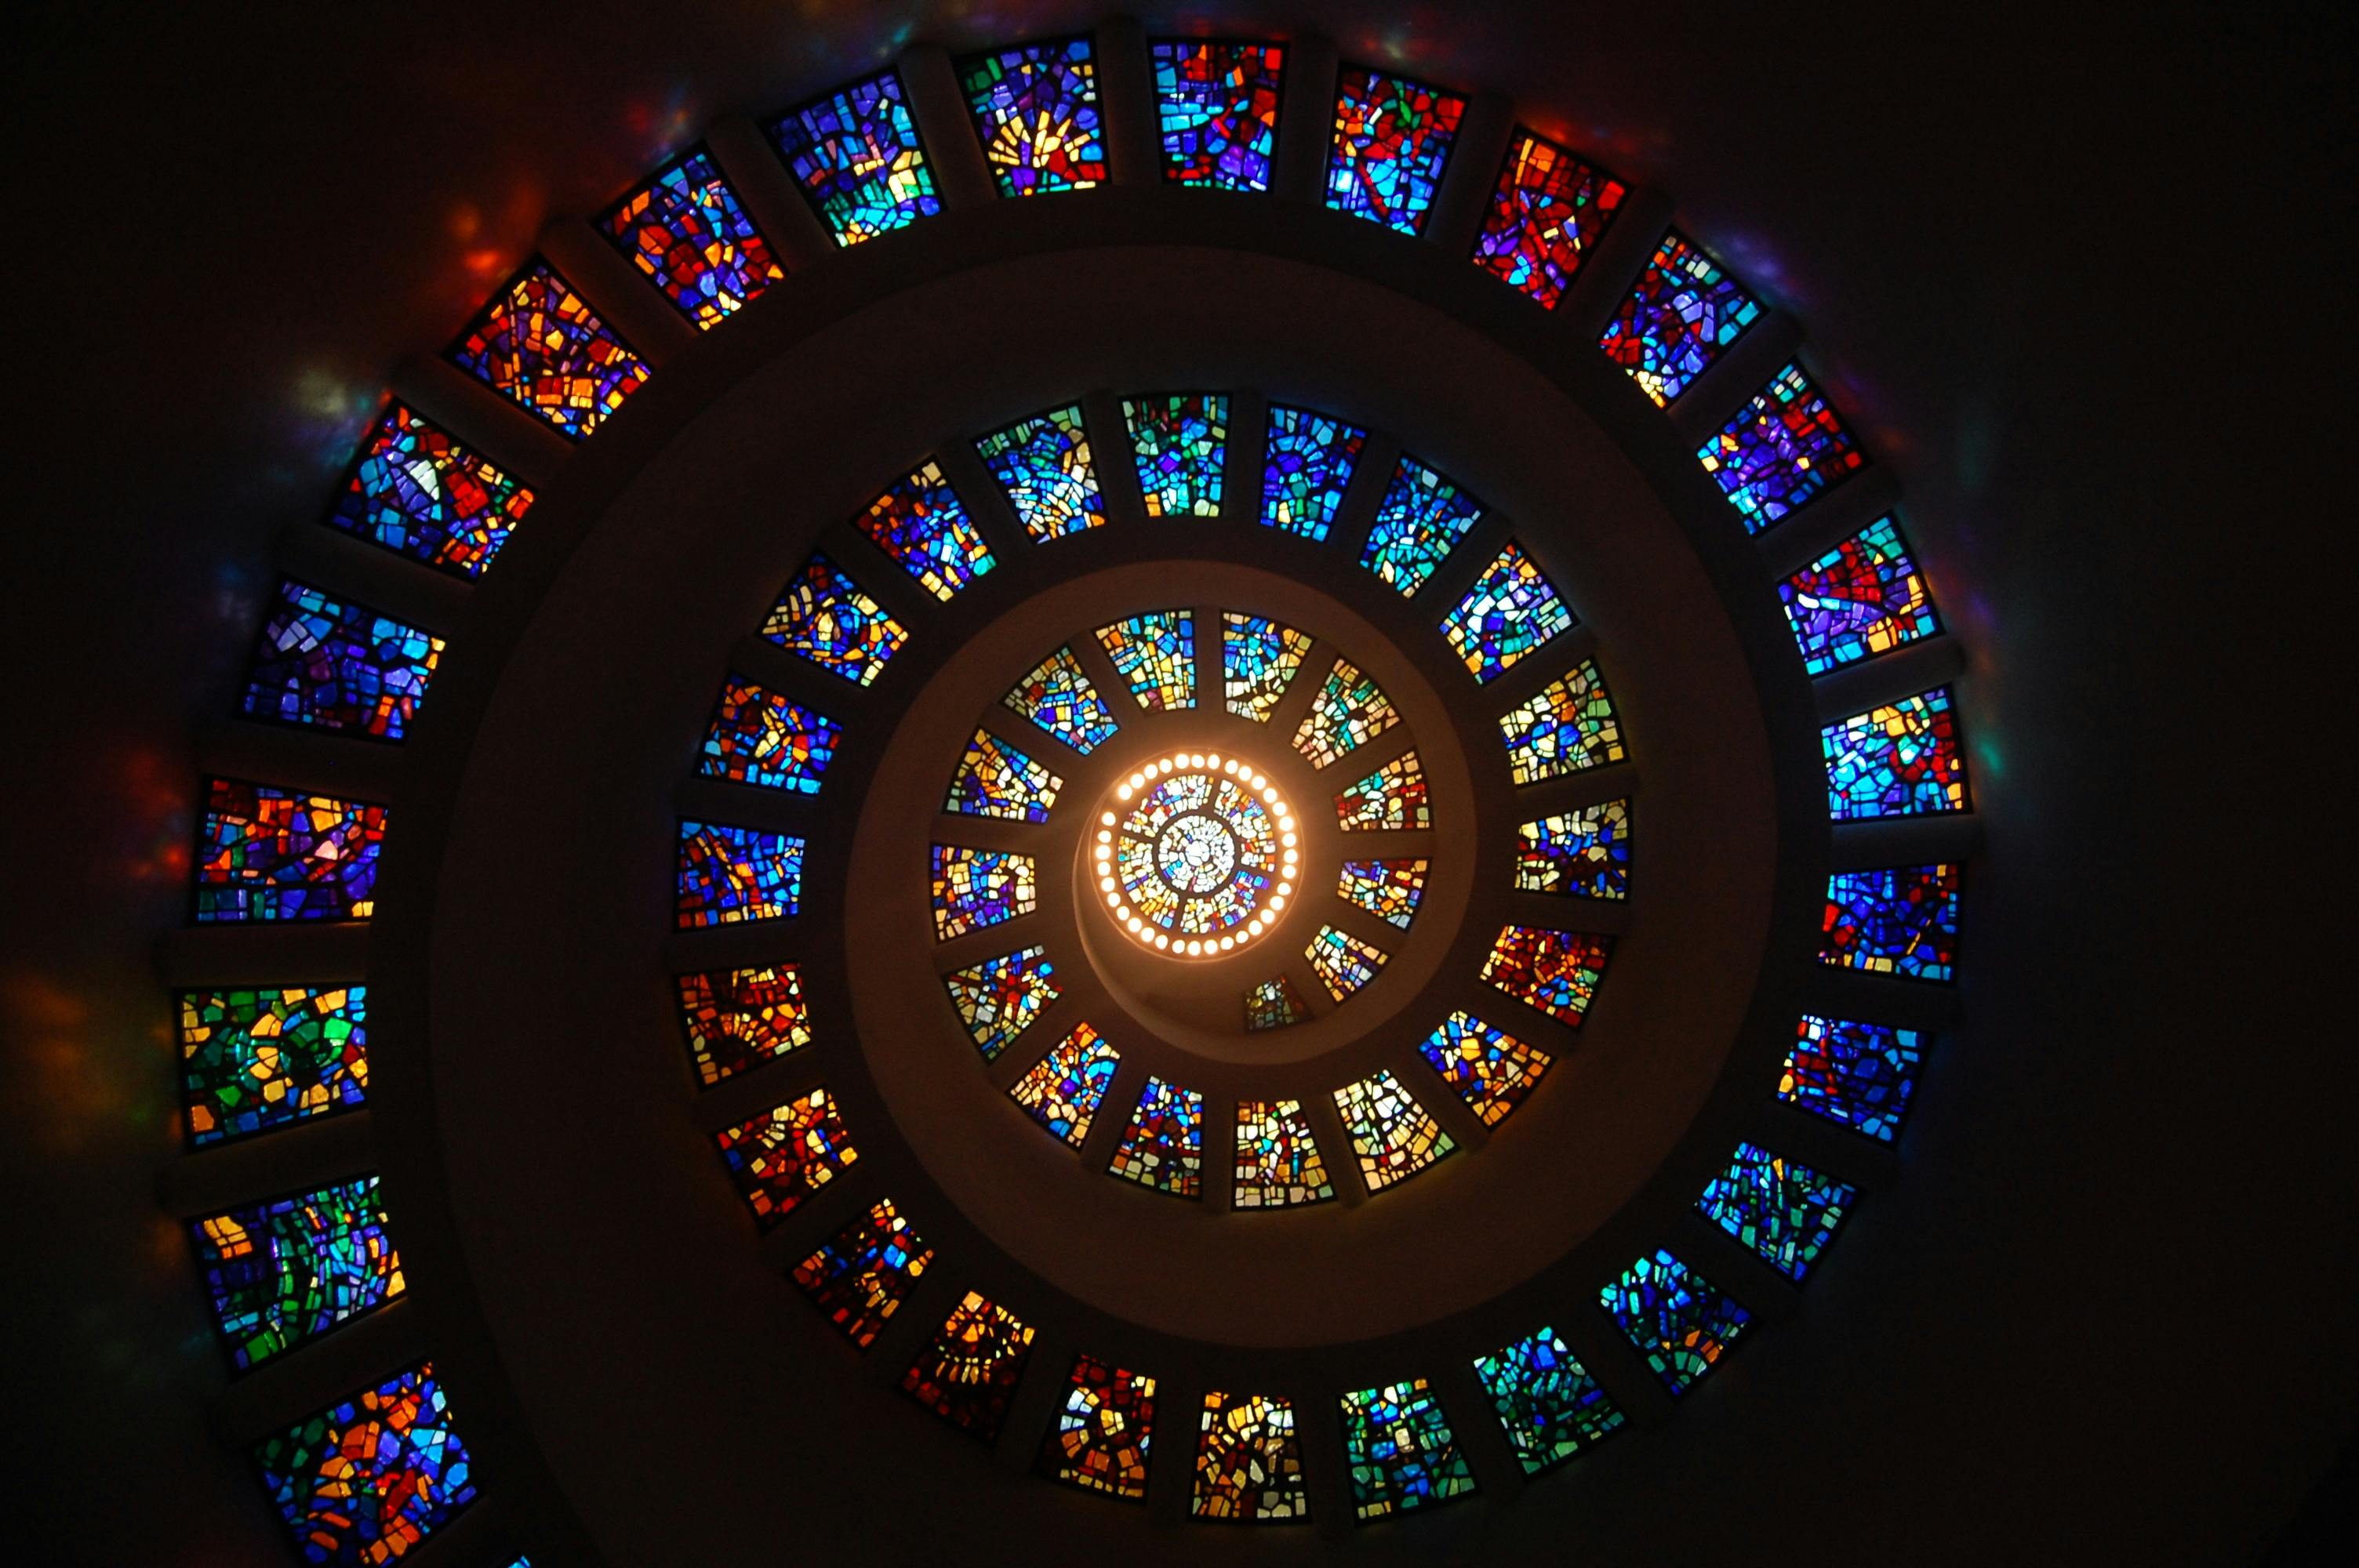 750 Stained Glass Pictures  Download Free Images on Unsplash